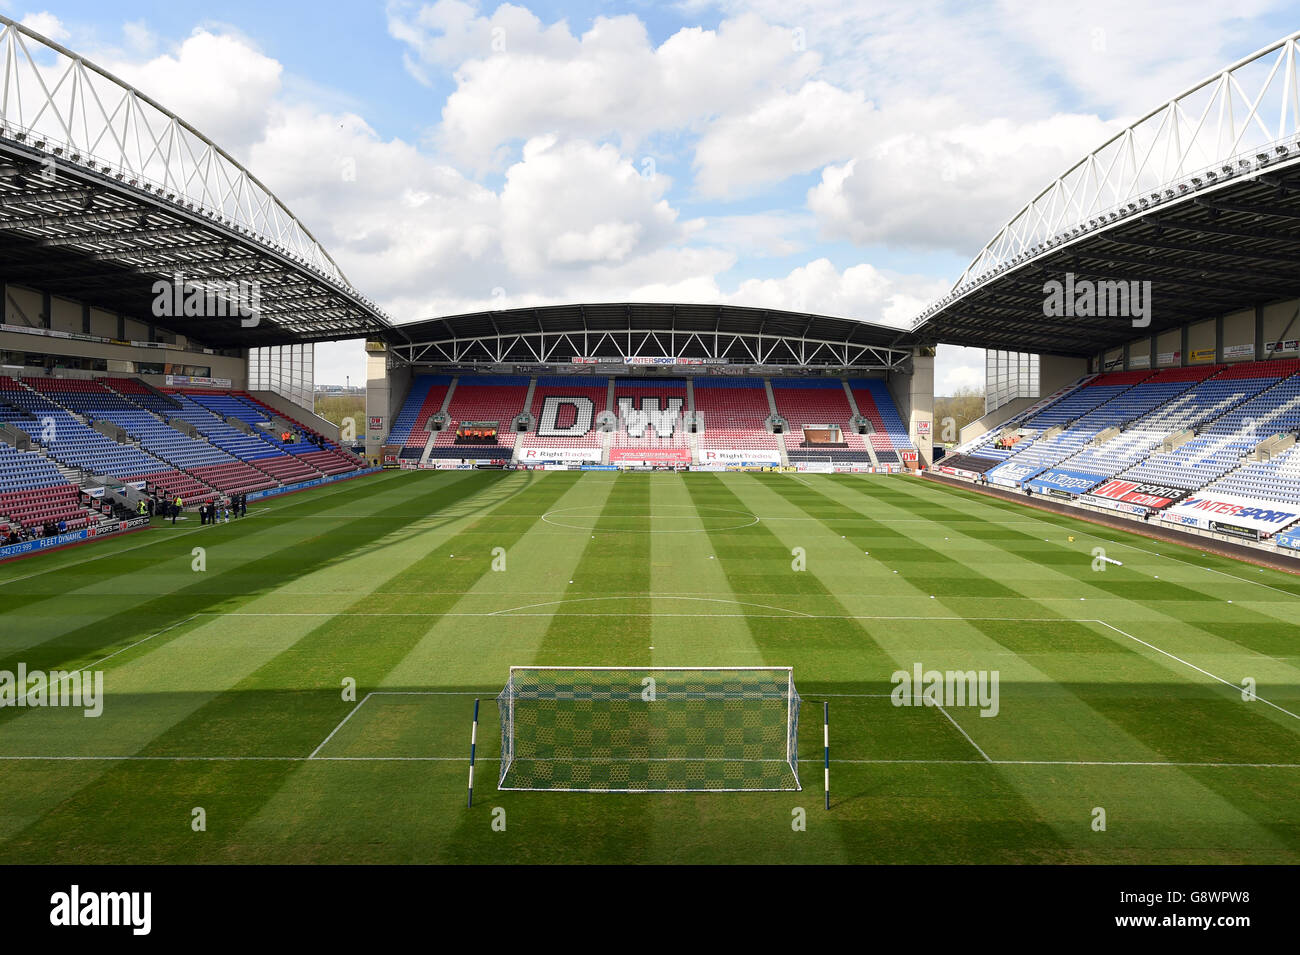 Wigan Athletic v Coventry City - Sky Bet League One - DW Stadium. A general view of the DW Stadium before the game Stock Photo